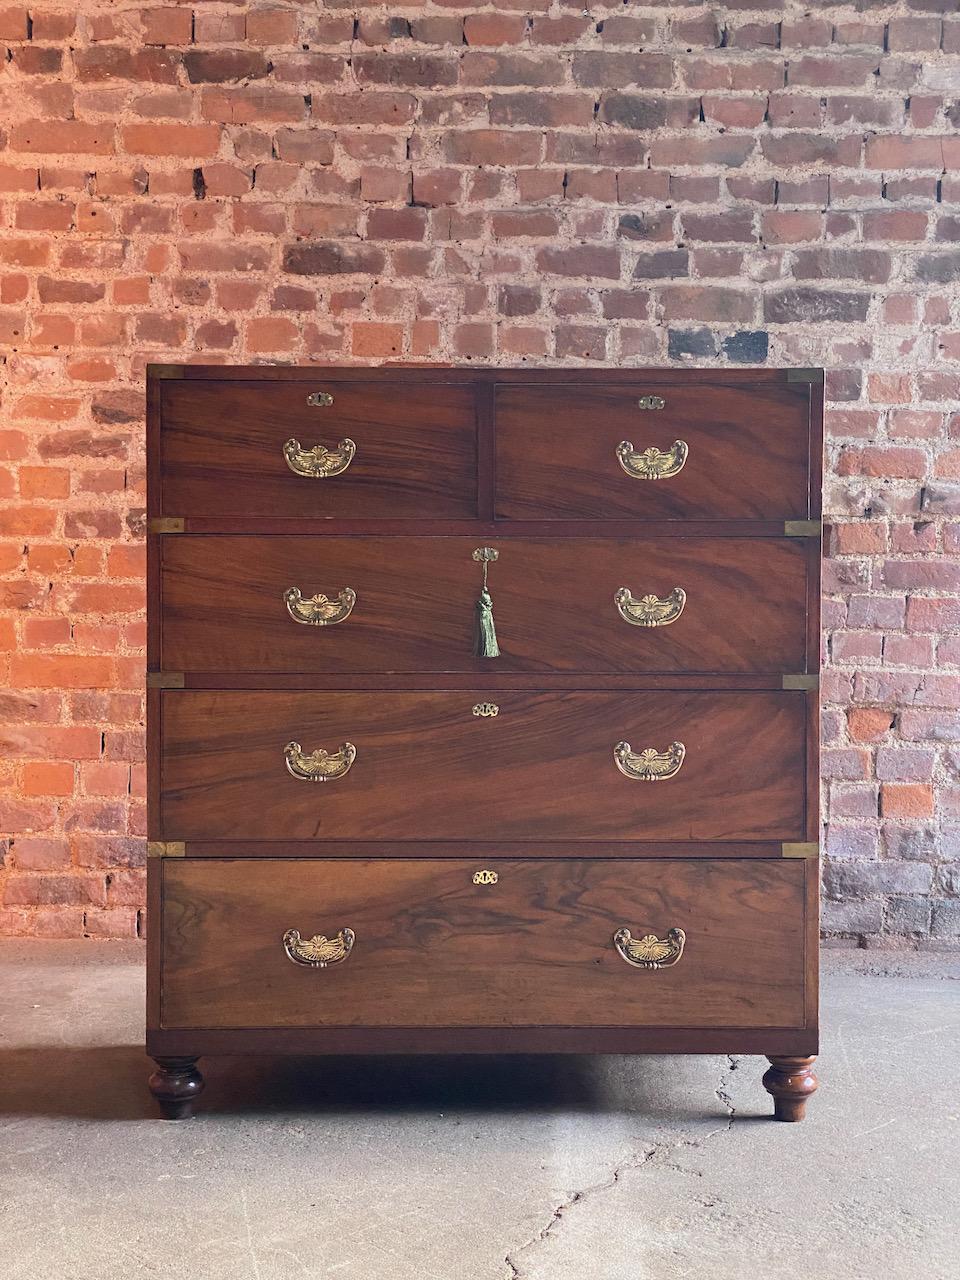 Antique military Campaign chest by Ross & Co of Dublin circa 1870 number 78

Exceptional Victorian military Campaign chest of drawers made of camphorwood, dating to late 19th century Ireland circa 1870, the chest in two halves with flush